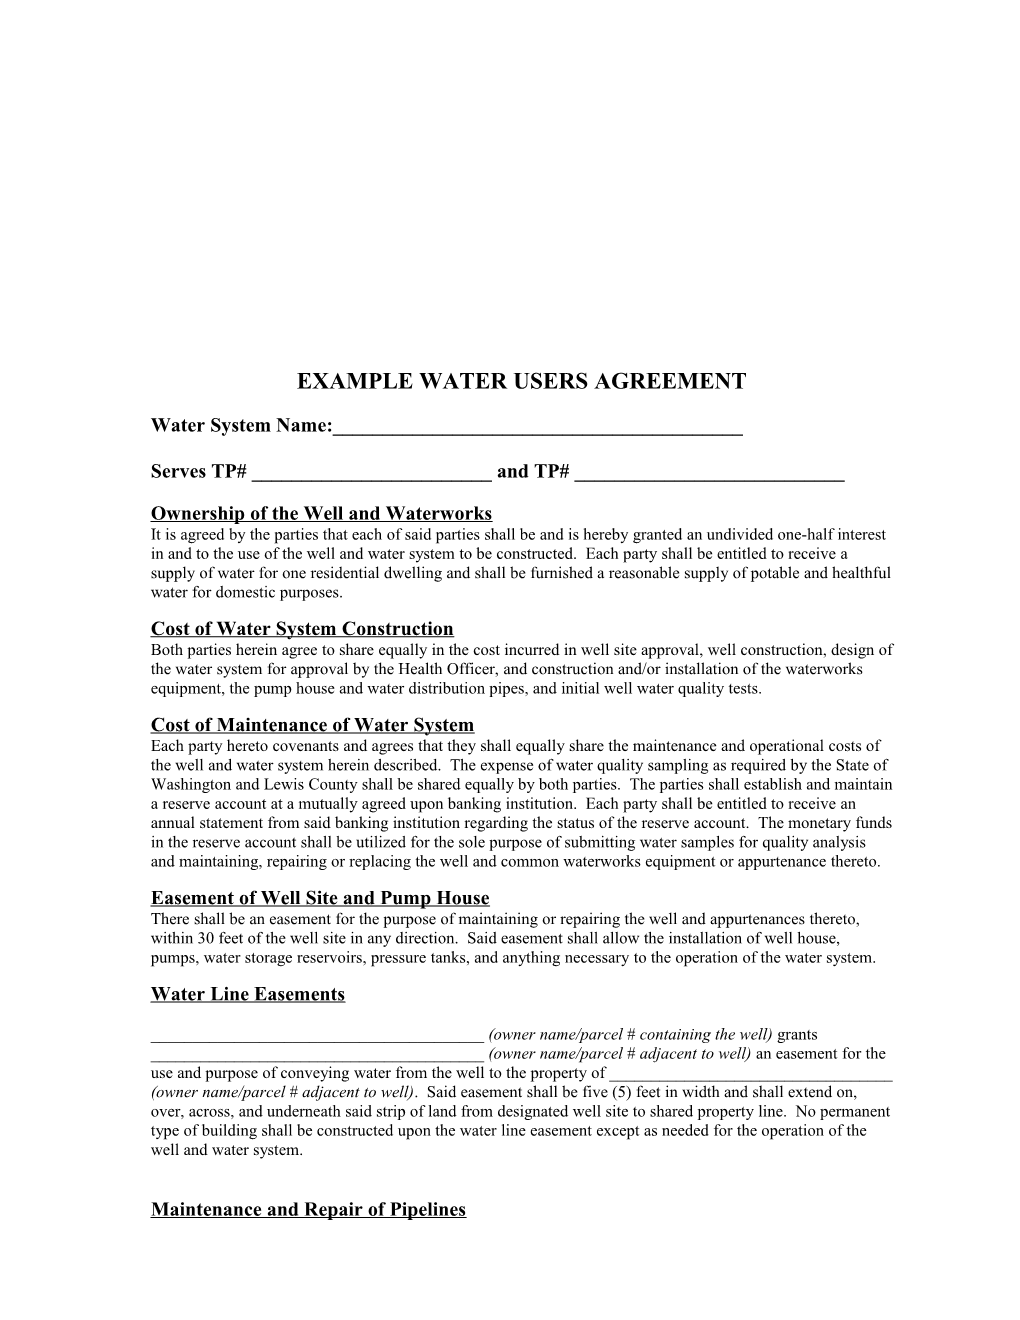 Example Water Users Agreement